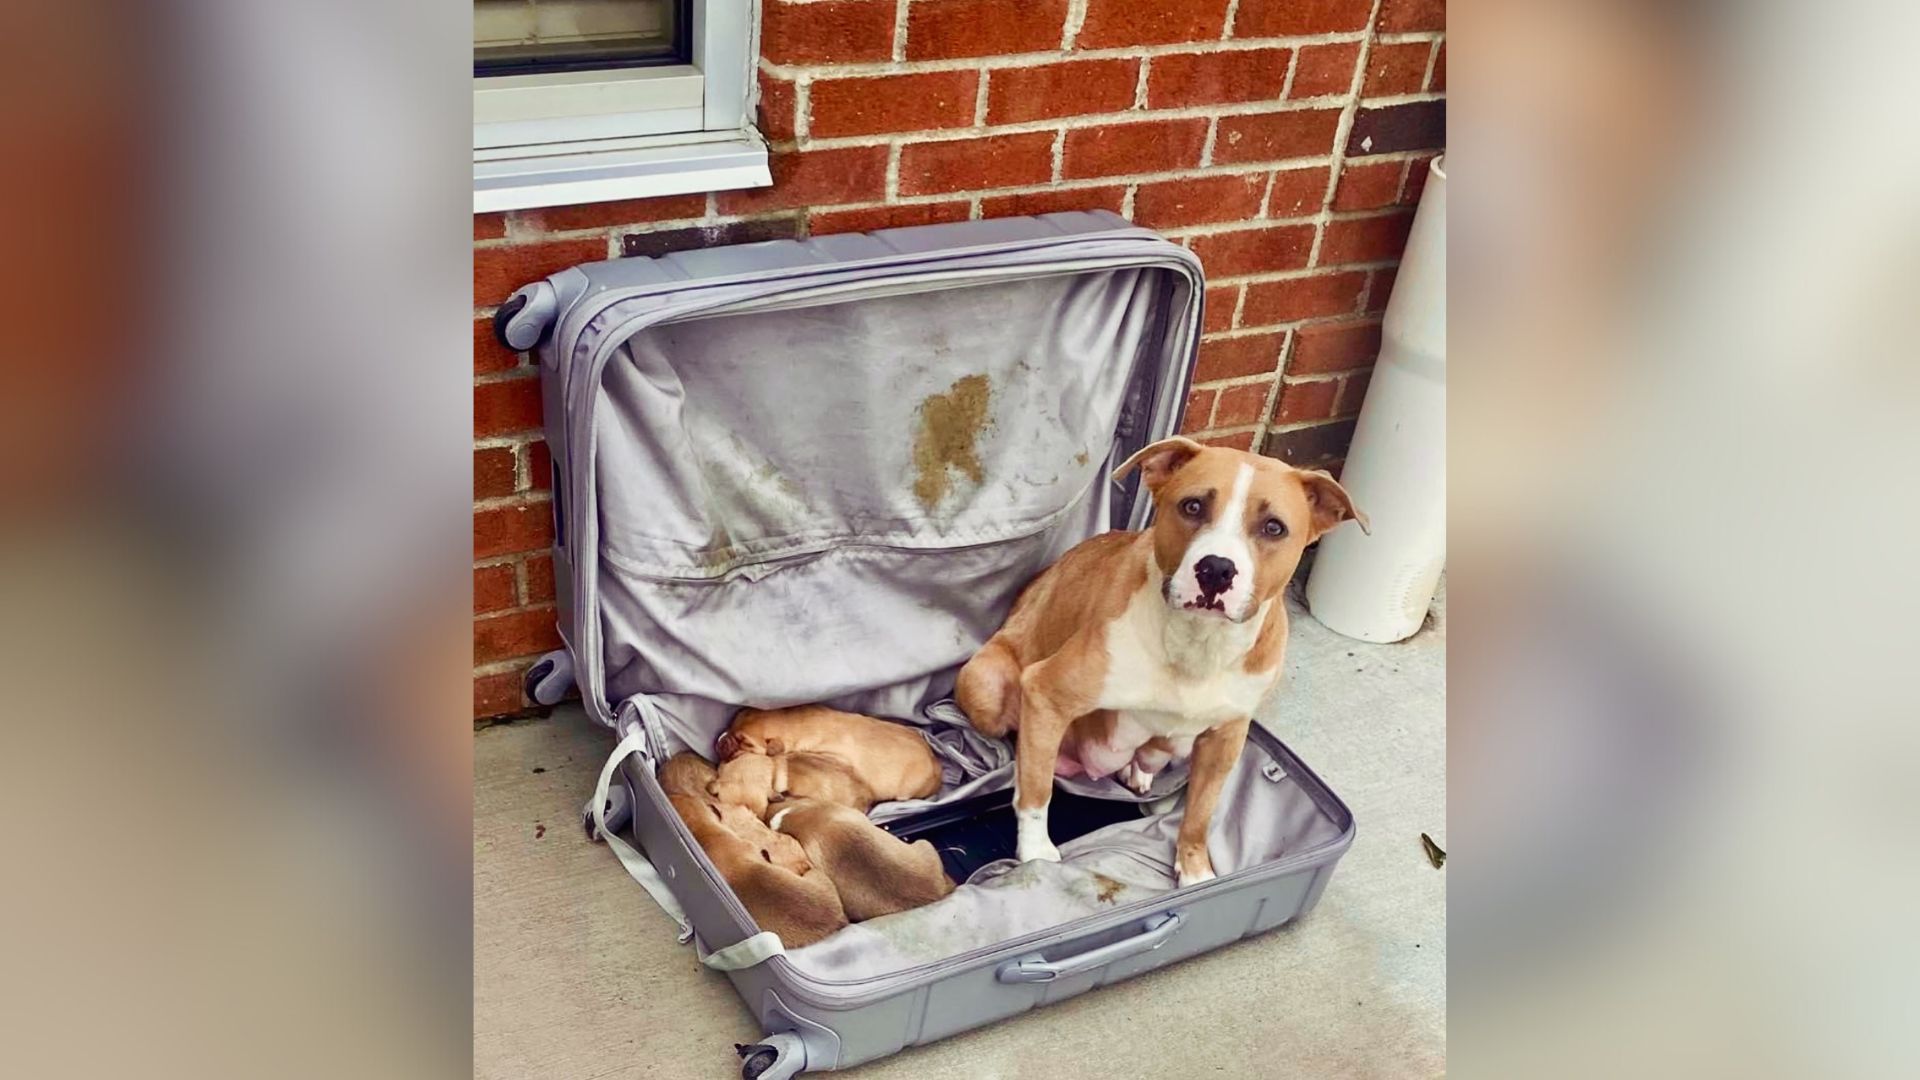 Firefighters Discover A Dog And Five Tiny Puppies Abandoned In A Zipped-Up Suitcase